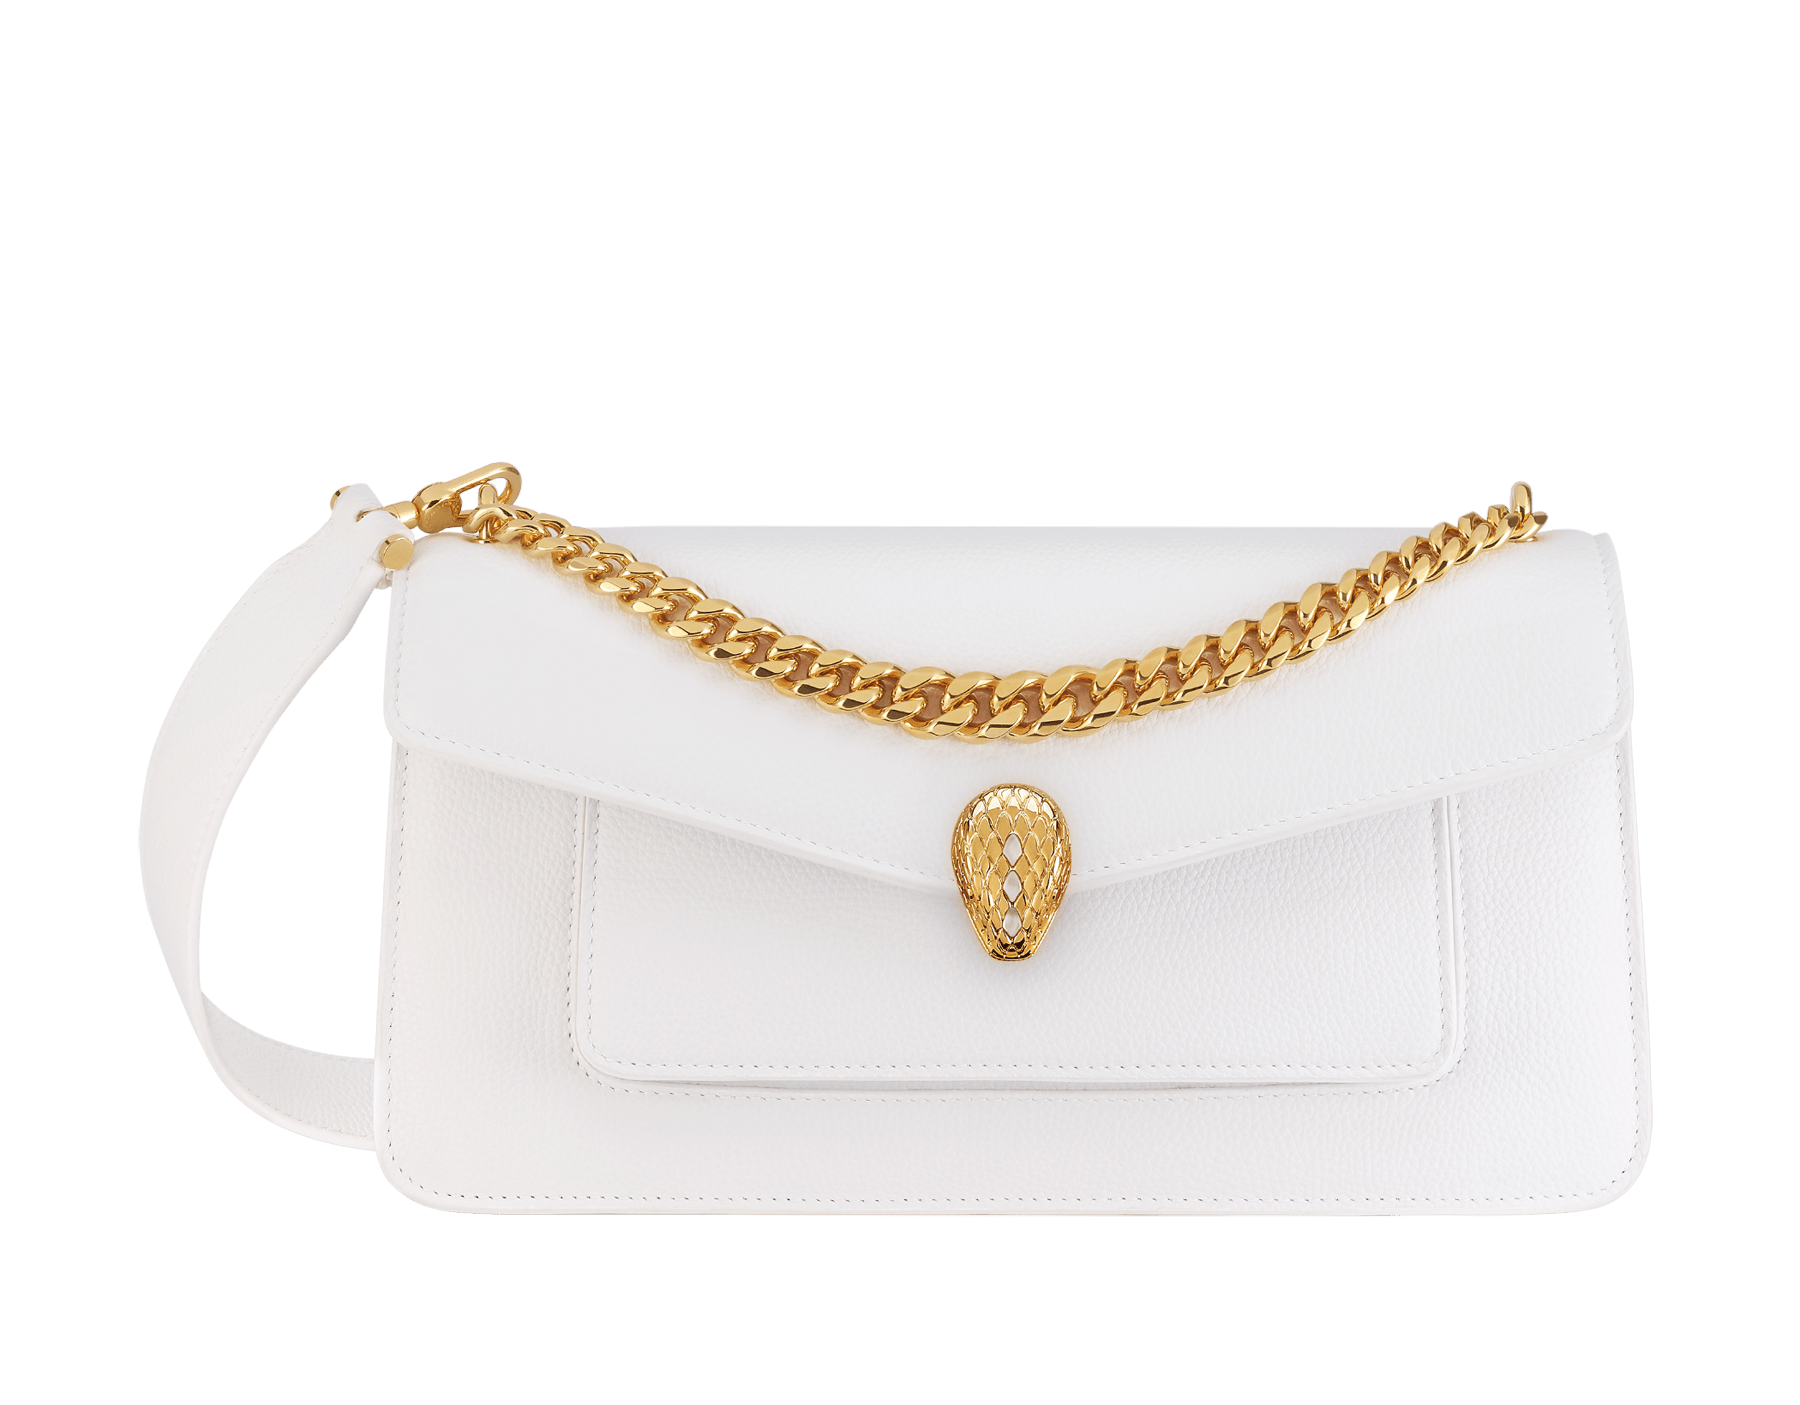 Serpenti East-West Maxi Chain medium shoulder bag in foggy opal gray Metropolitan calf leather with linen agate beige nappa leather lining. Captivating snakehead magnetic closure in gold-plated brass embellished with gray agate scales and red enamel eyes. SEA-1238-MCCL image 1